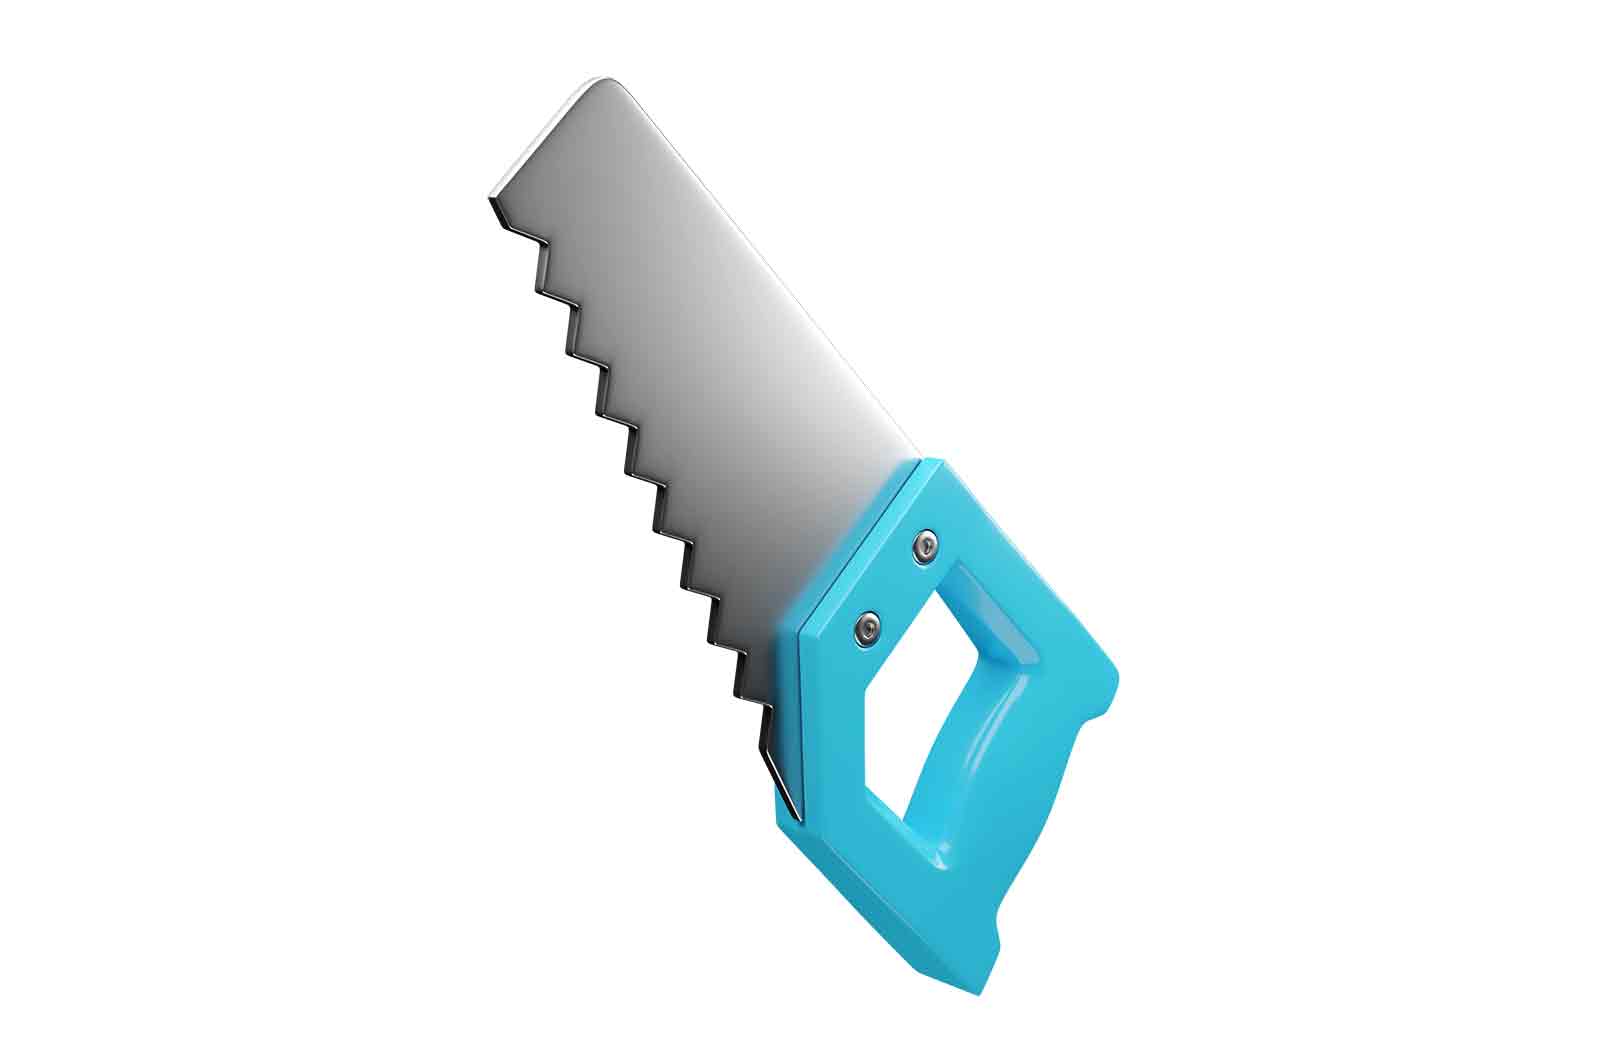 Blue saw with silver blade, 3d rendered illustration. A hand tool used for cutting wood, metal, or other materials.